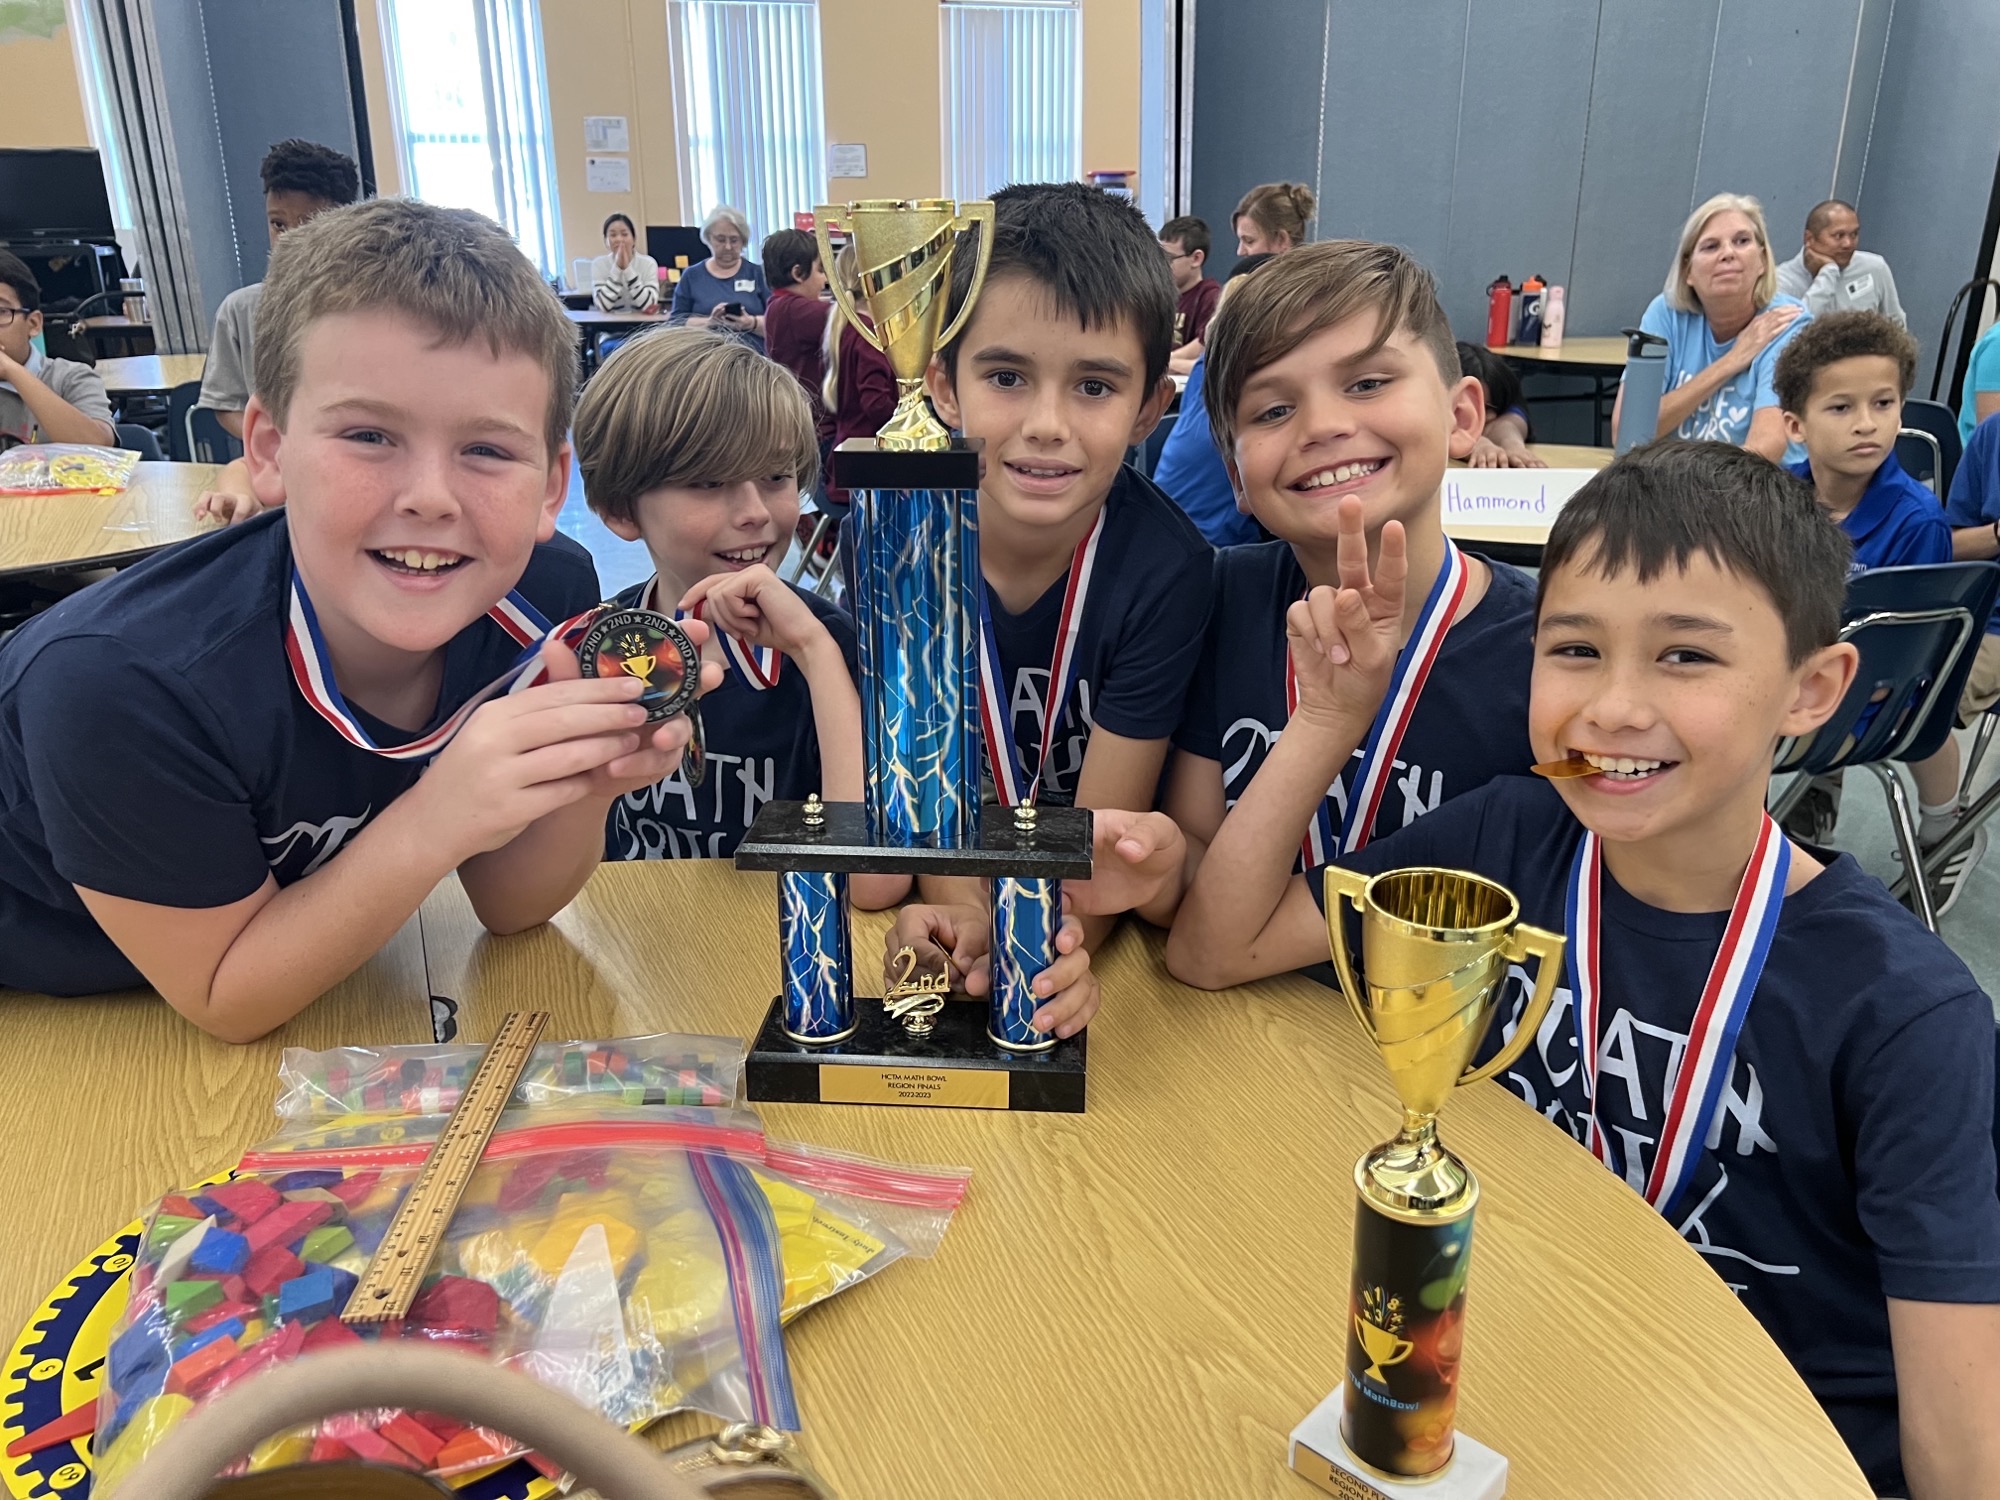 Local Elementary School wins 2nd place at Math Bowl!